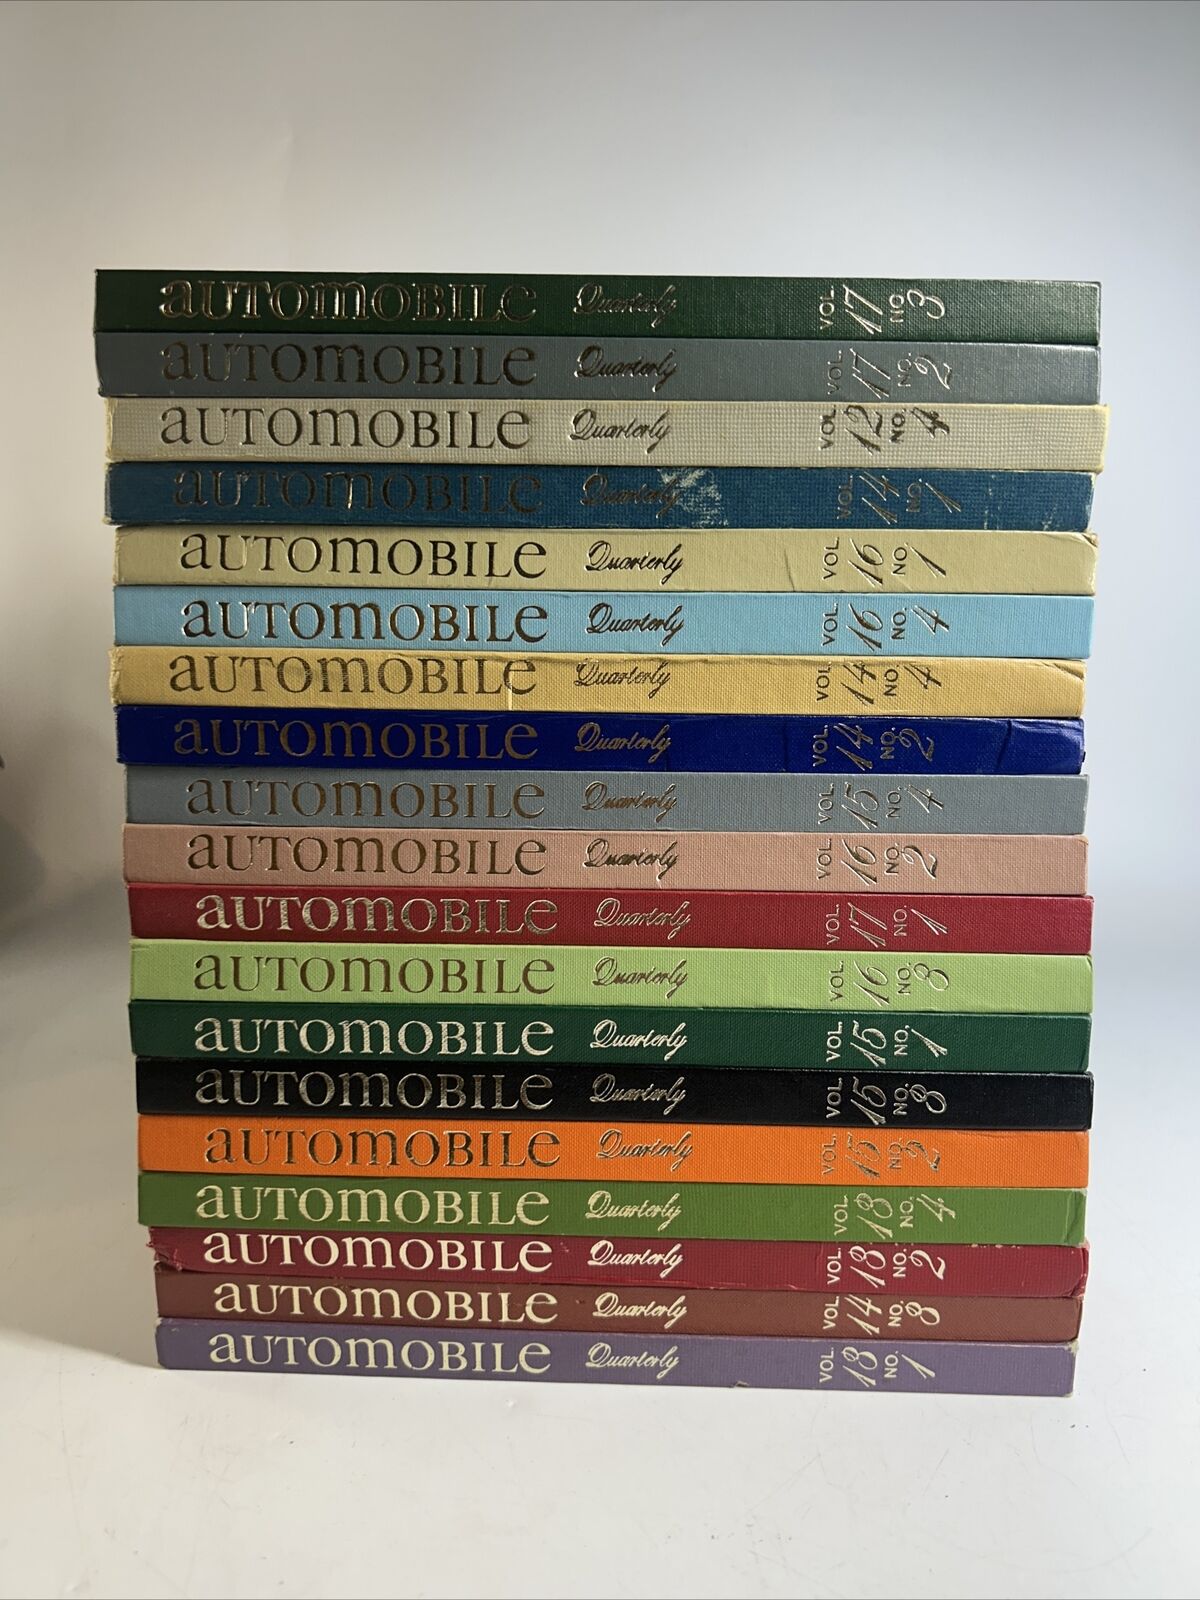 Automobile Quarterly Hardcover Books lot of 19, please read/see pics